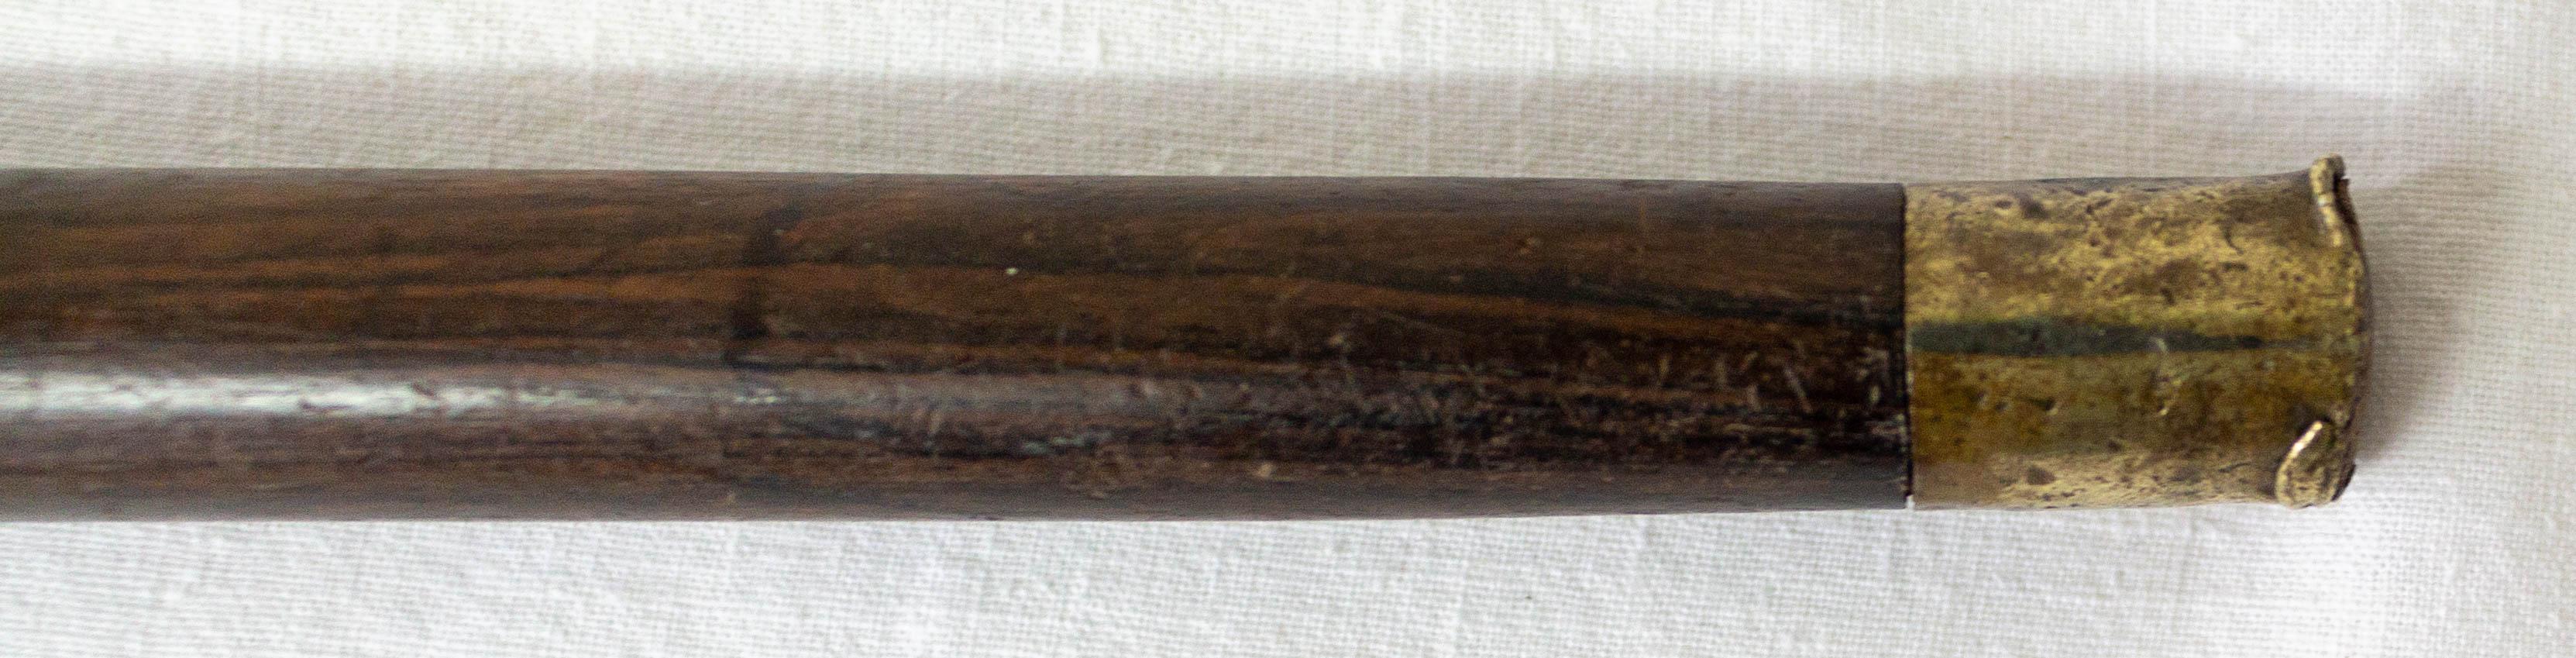 French Cane or Walking Stick Exotic Wood and Silver, circa 1900 For Sale 1